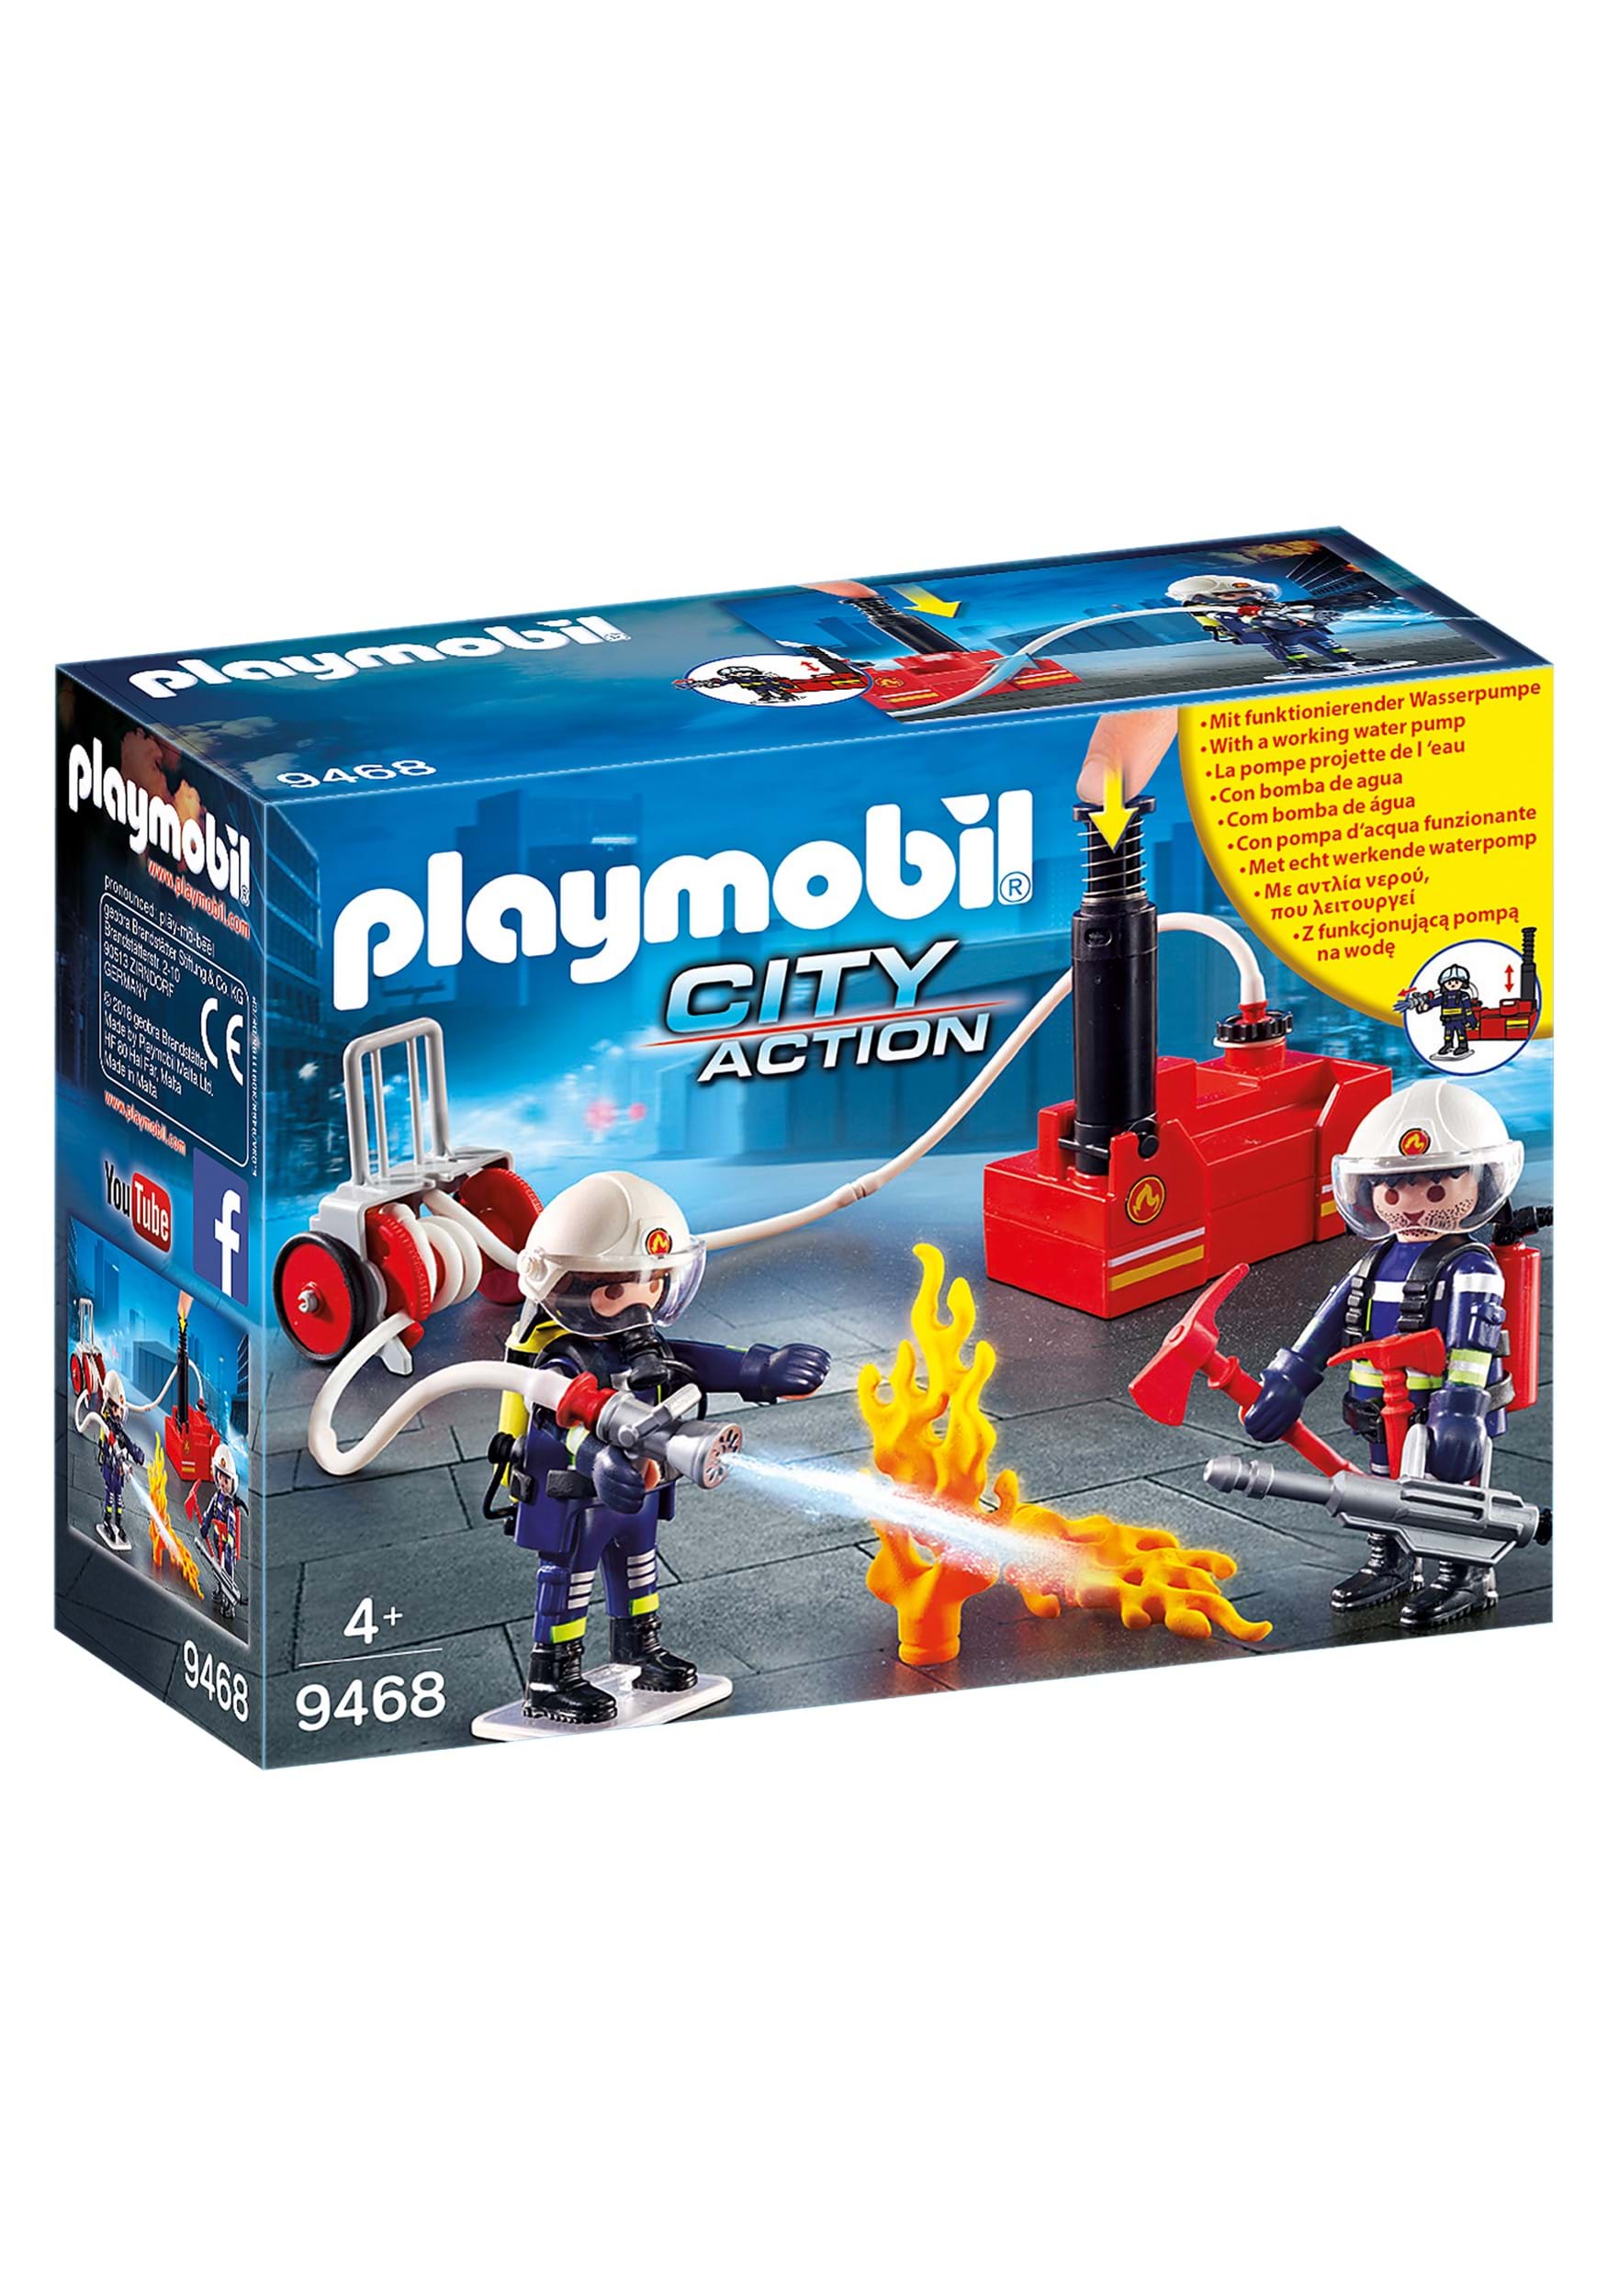 Playmobil Firefighters w/ Water Pump Play Set